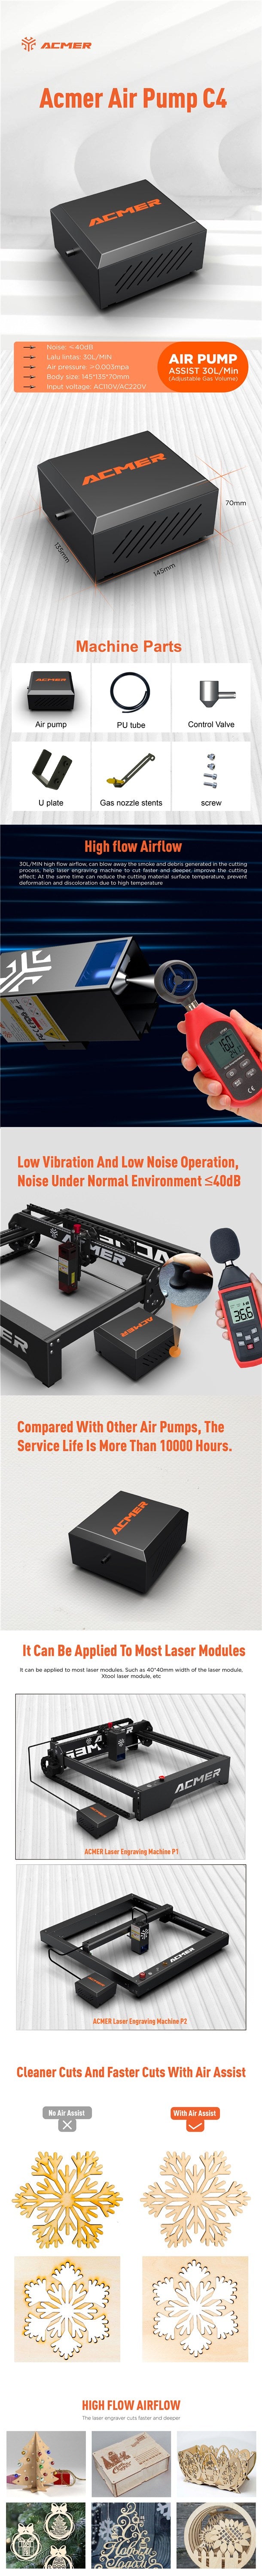 [EU/US Direct] ACMER C4 Air Pump Assist System for Laser Engraving Machine Laser Cutting Engraving Air-assisted Accessories